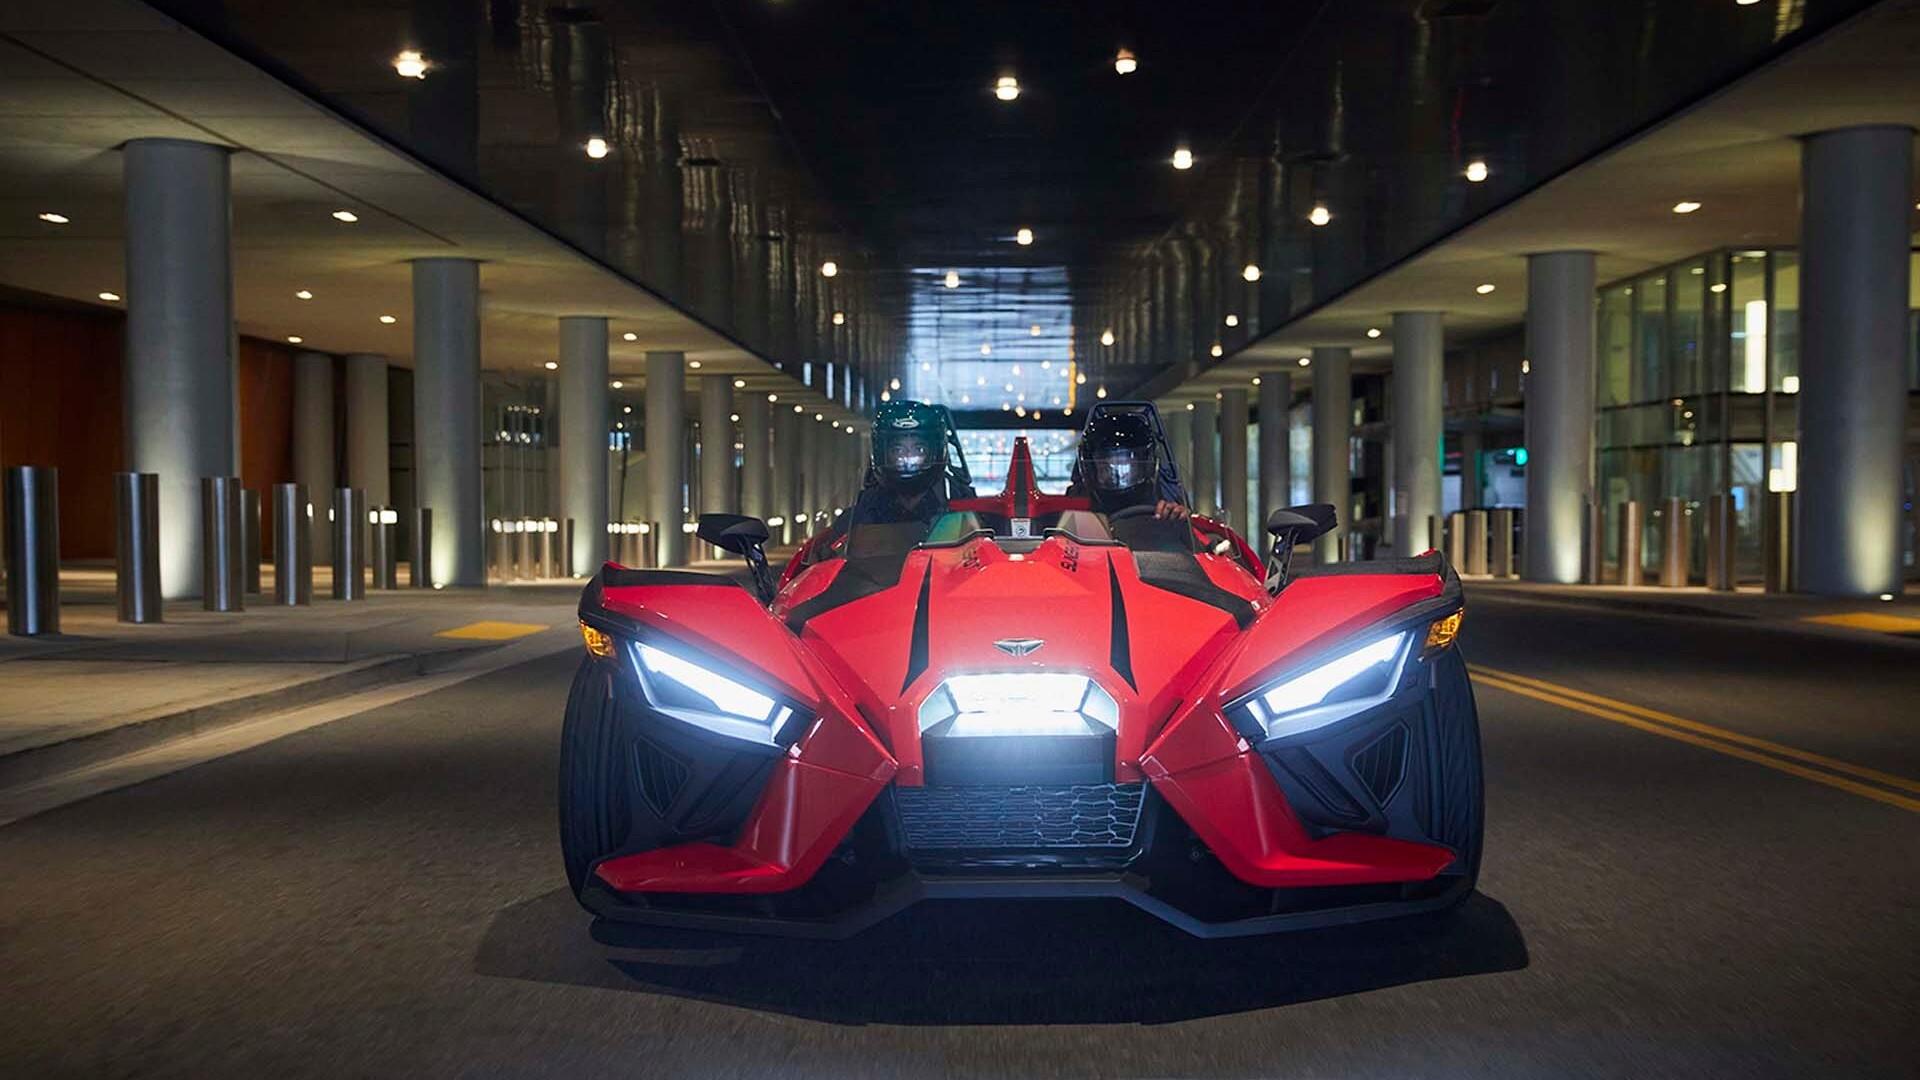 2021 Polaris Slingshot R Review A 203HP ThreeWheeler Is For Those Who  Live Out Loud